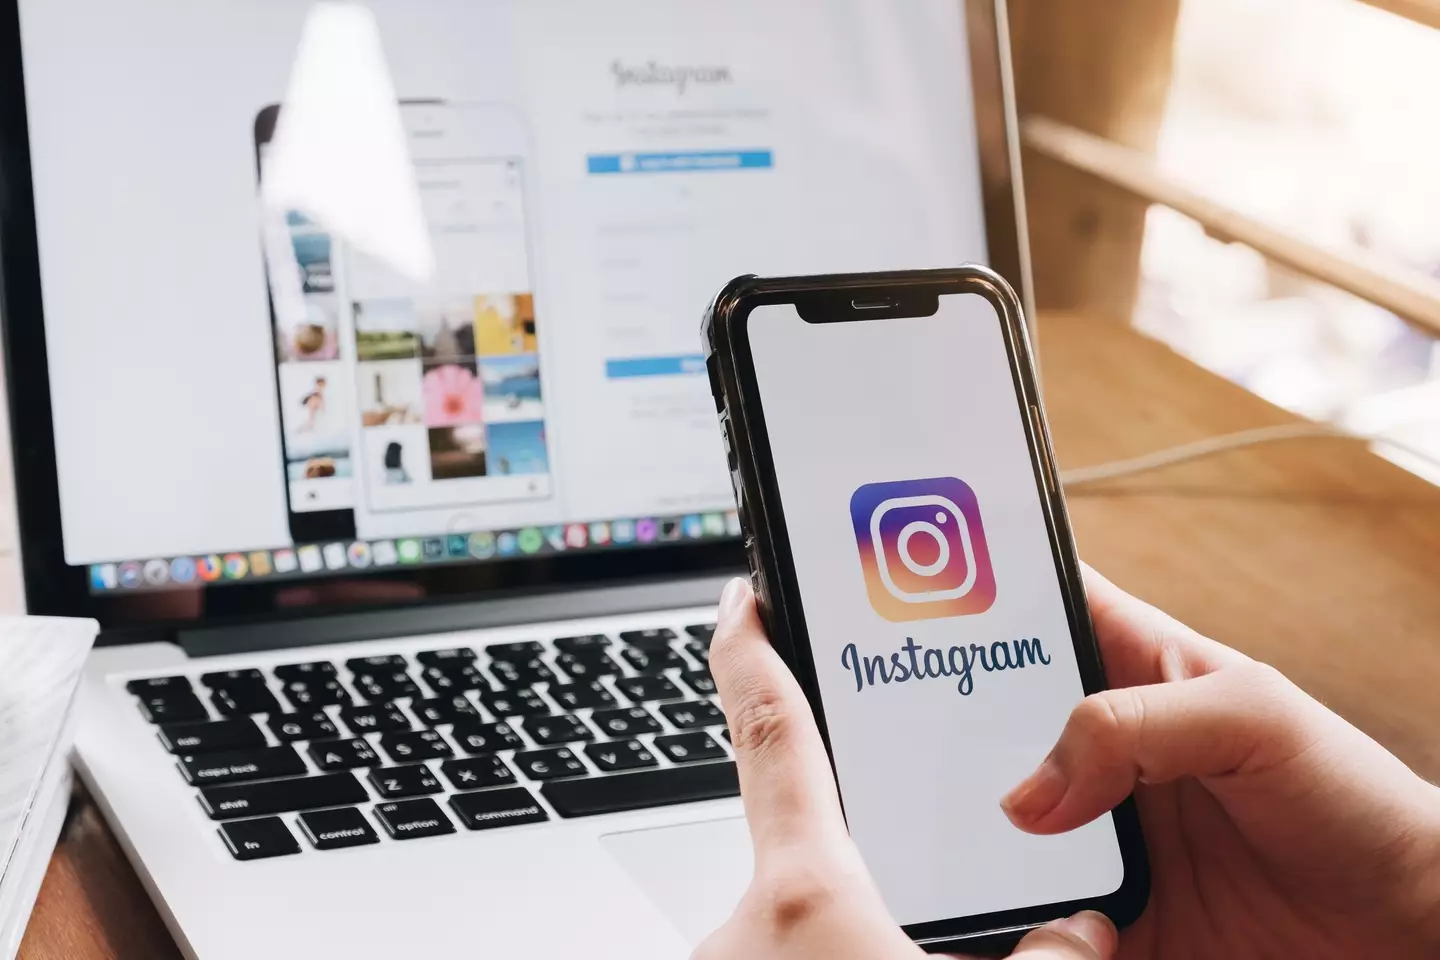 Instagram started testing its new, ‘TikTok-style’ format earlier this month.